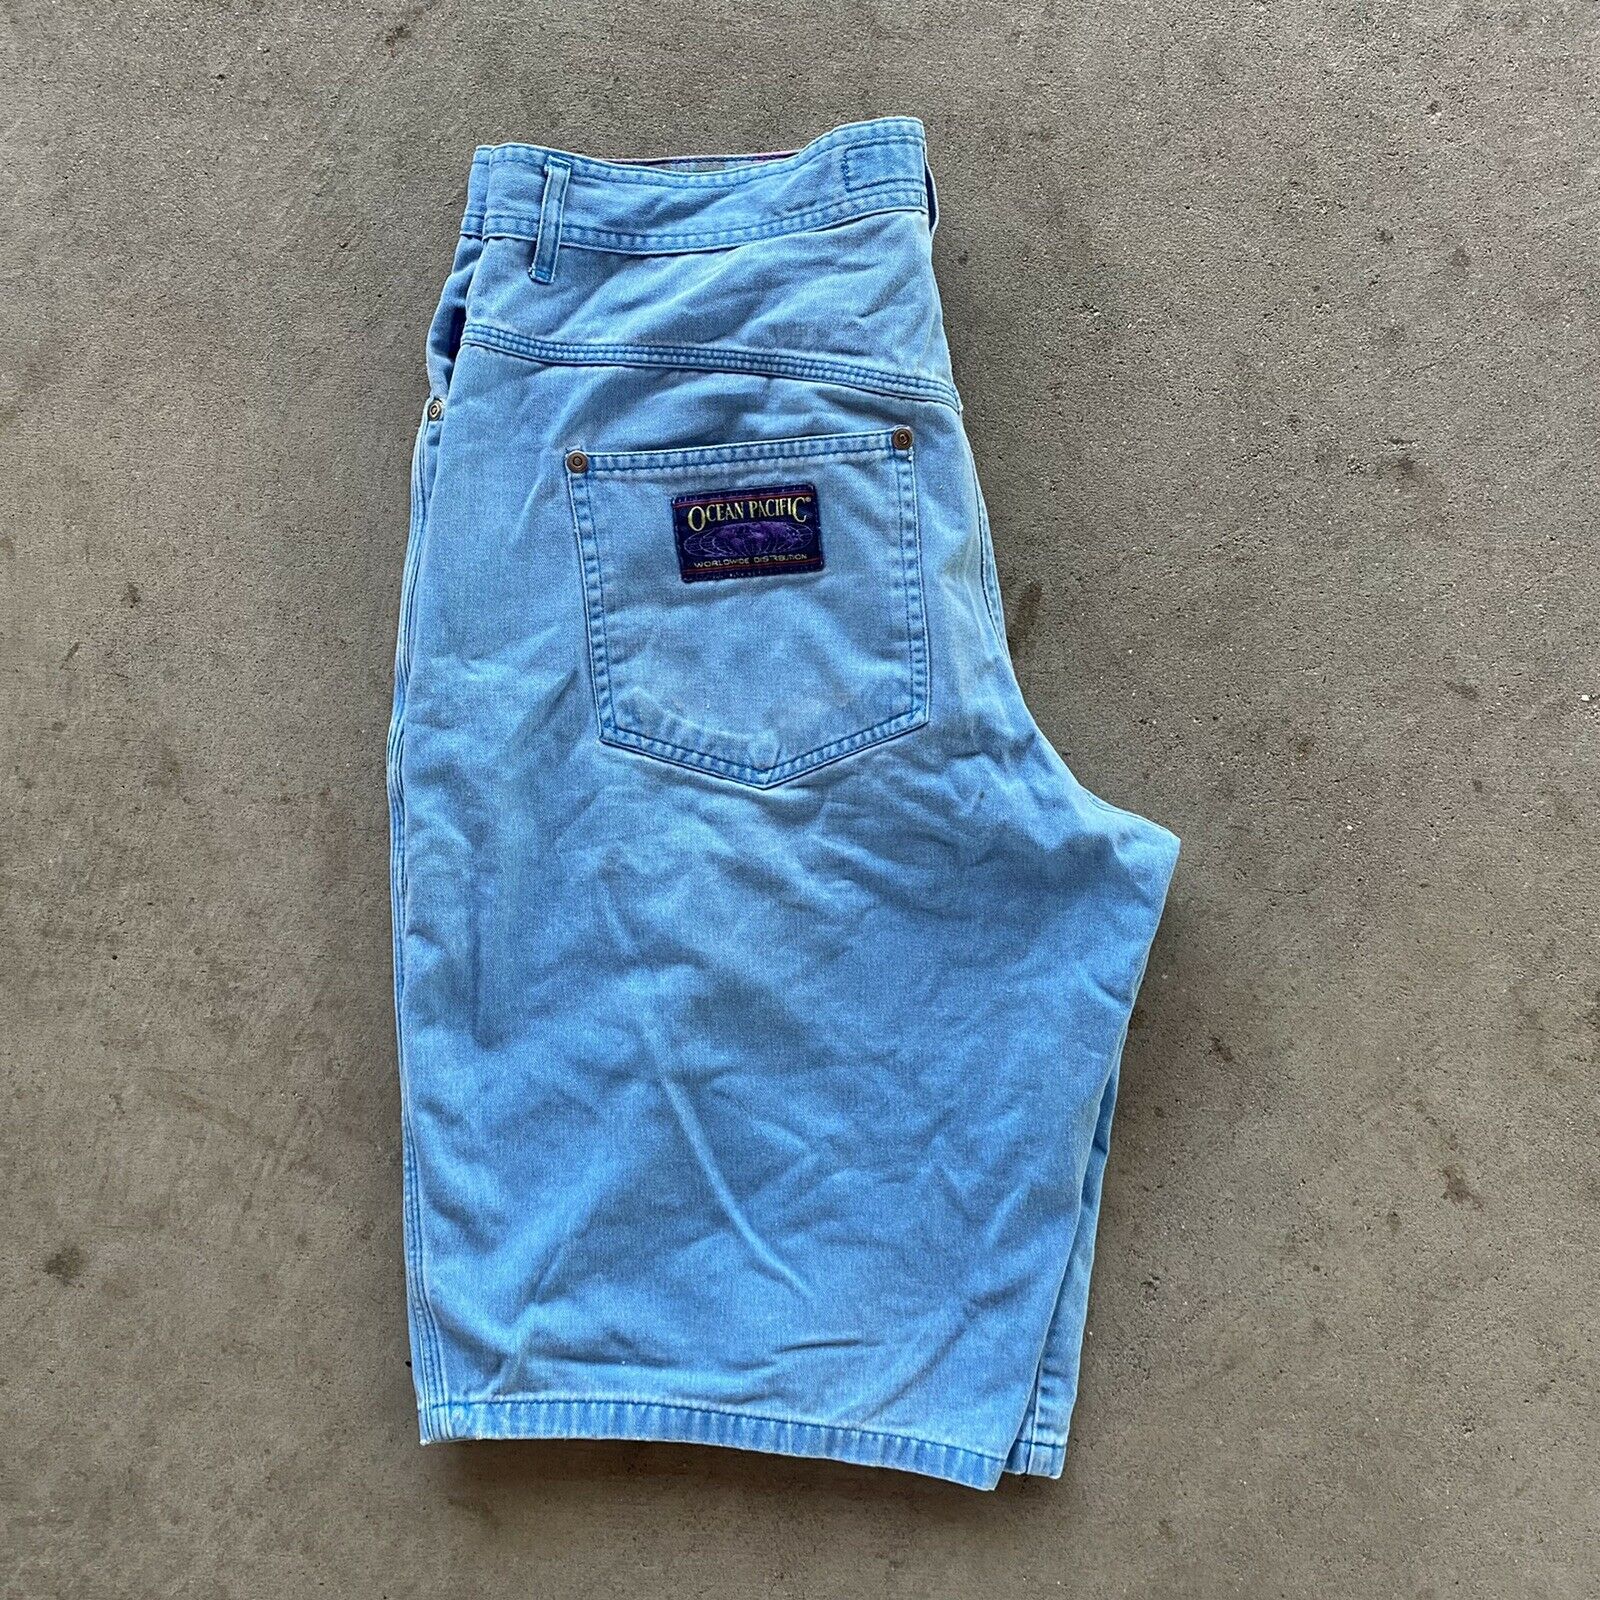 Vintage 90s Blue Ocean Pacific Classic California Style Chino Shorts Size 34